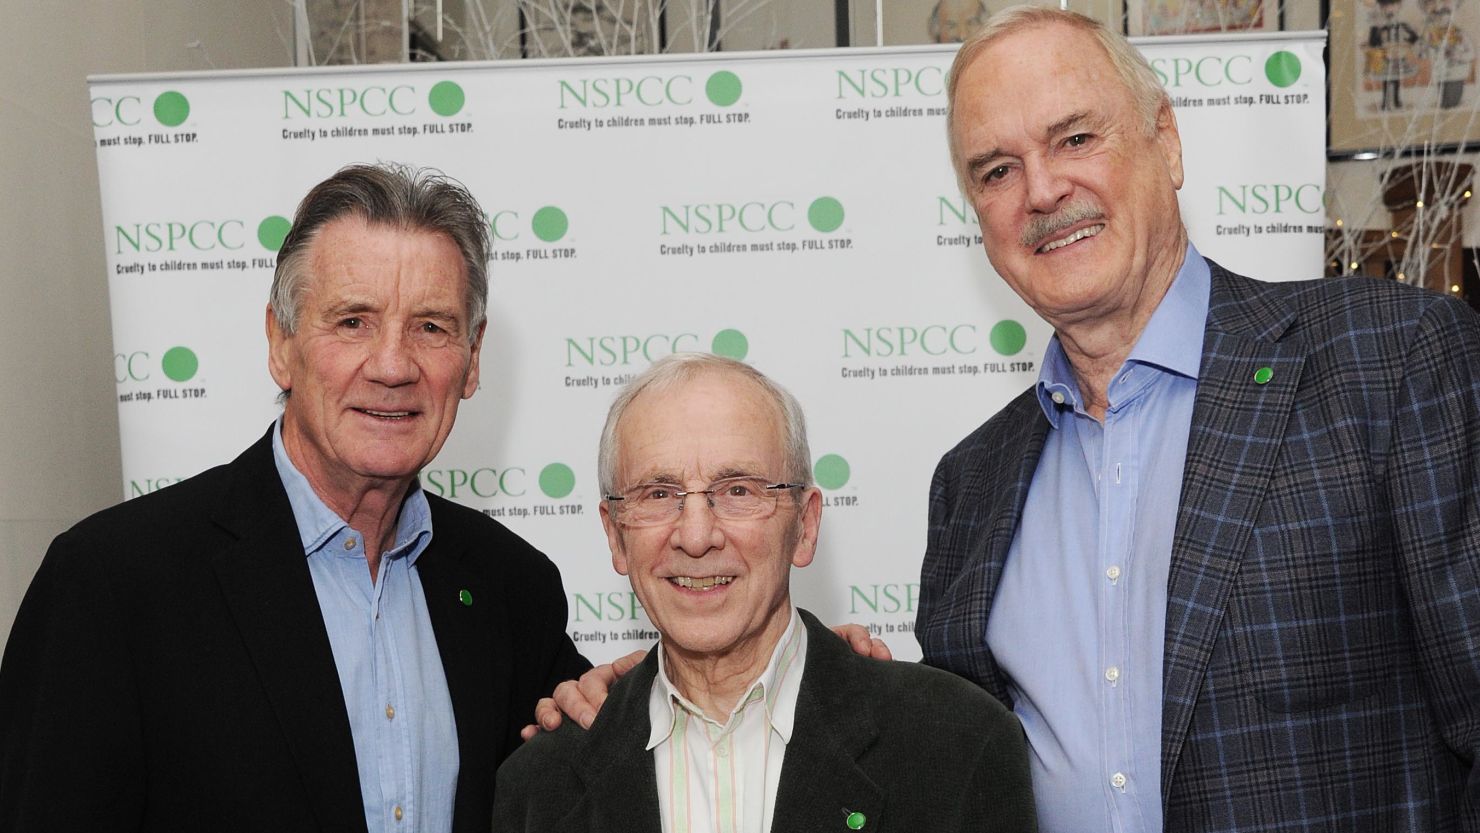 Michael Palin, Andrew Sachs, center, and John Cleese attend an event in London November 24, 2013.